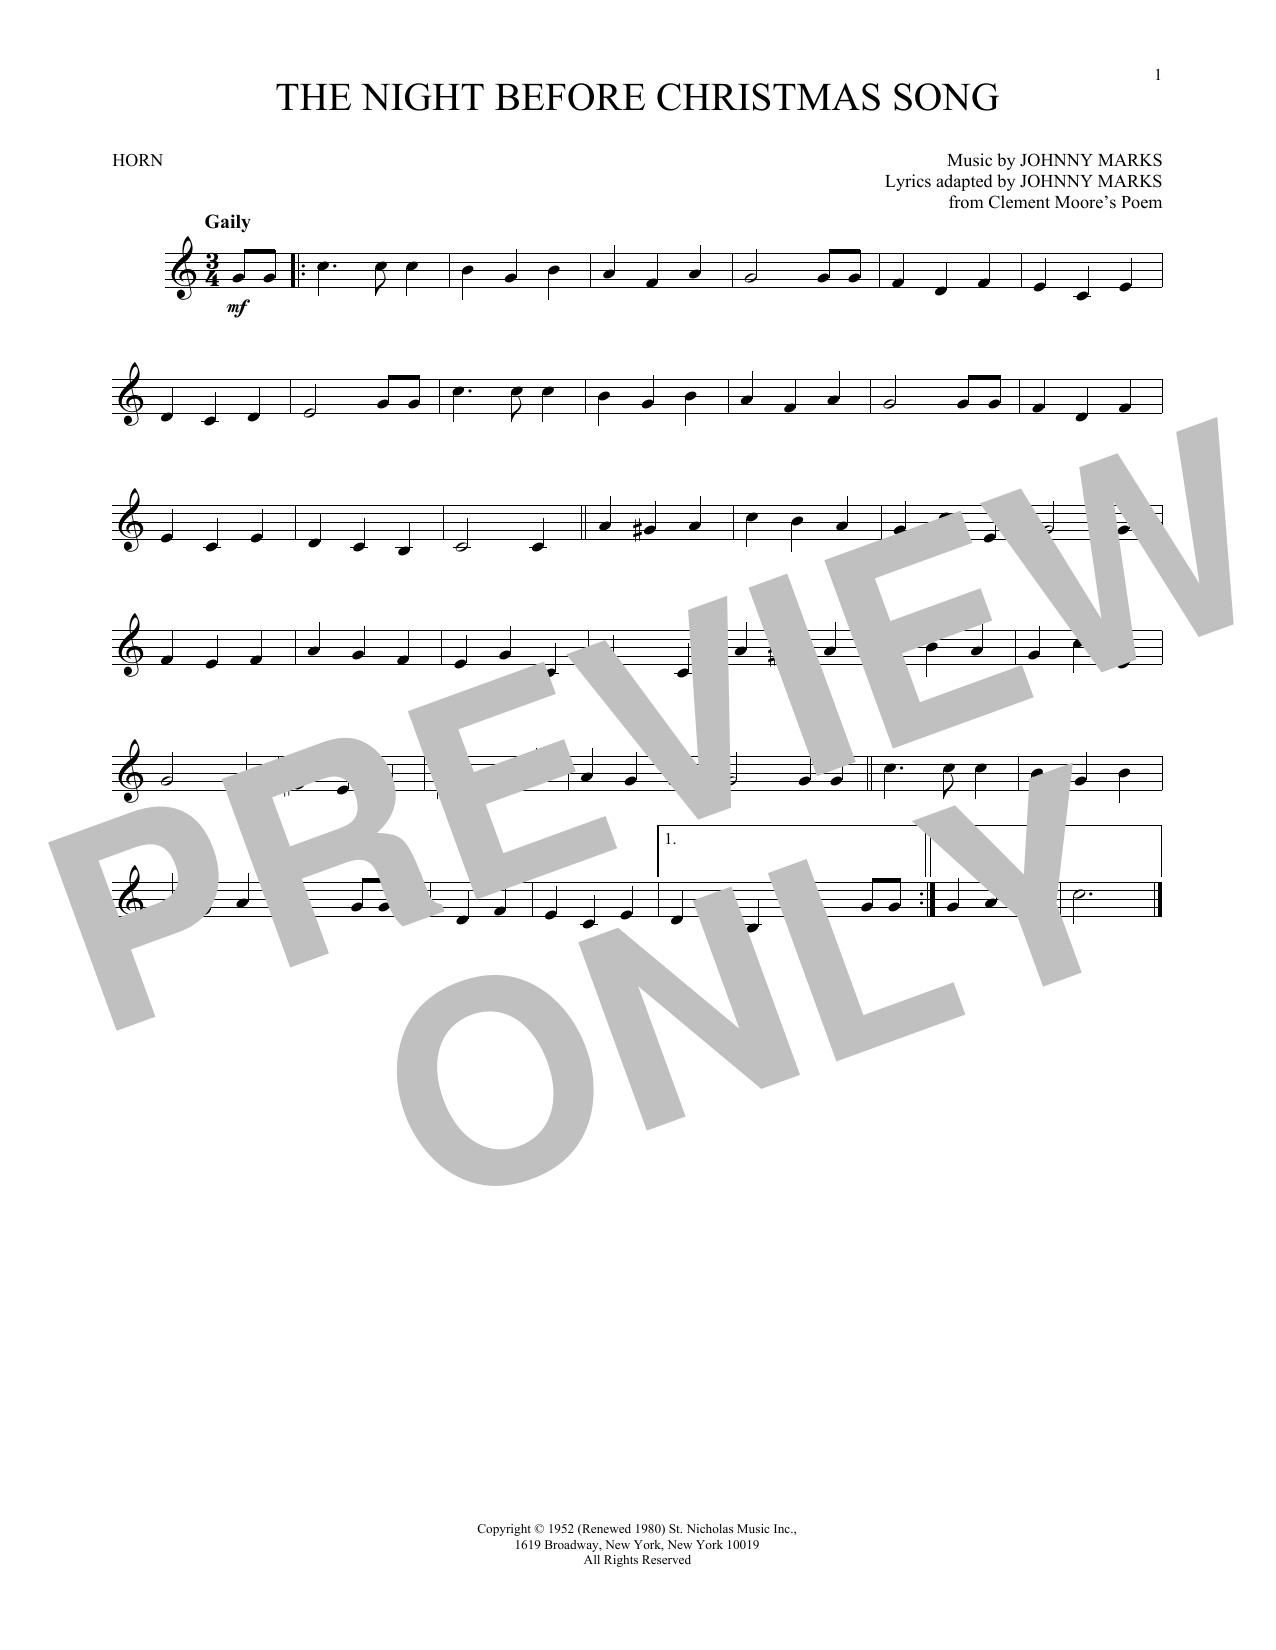 Download Johnny Marks The Night Before Christmas Song Sheet Music